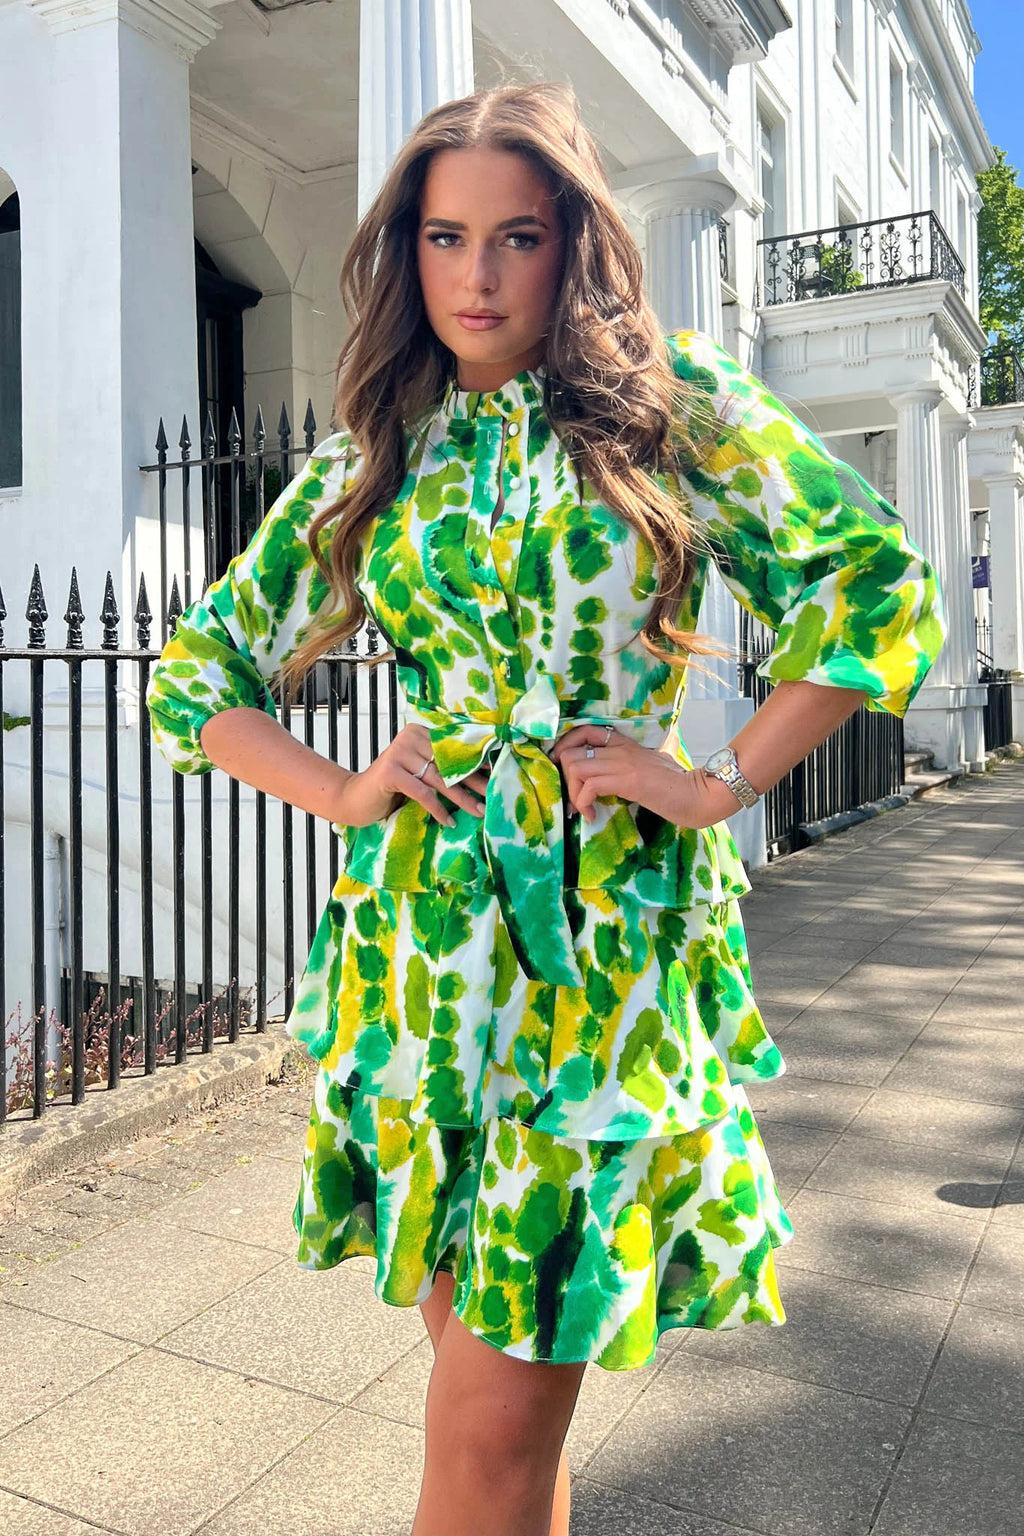 Featuring layered skirt, 3/4 sleeve, frill collar and a stunning print - this will be your new favourite dress all year round. Pair with heels and a mini bag to complete the lo